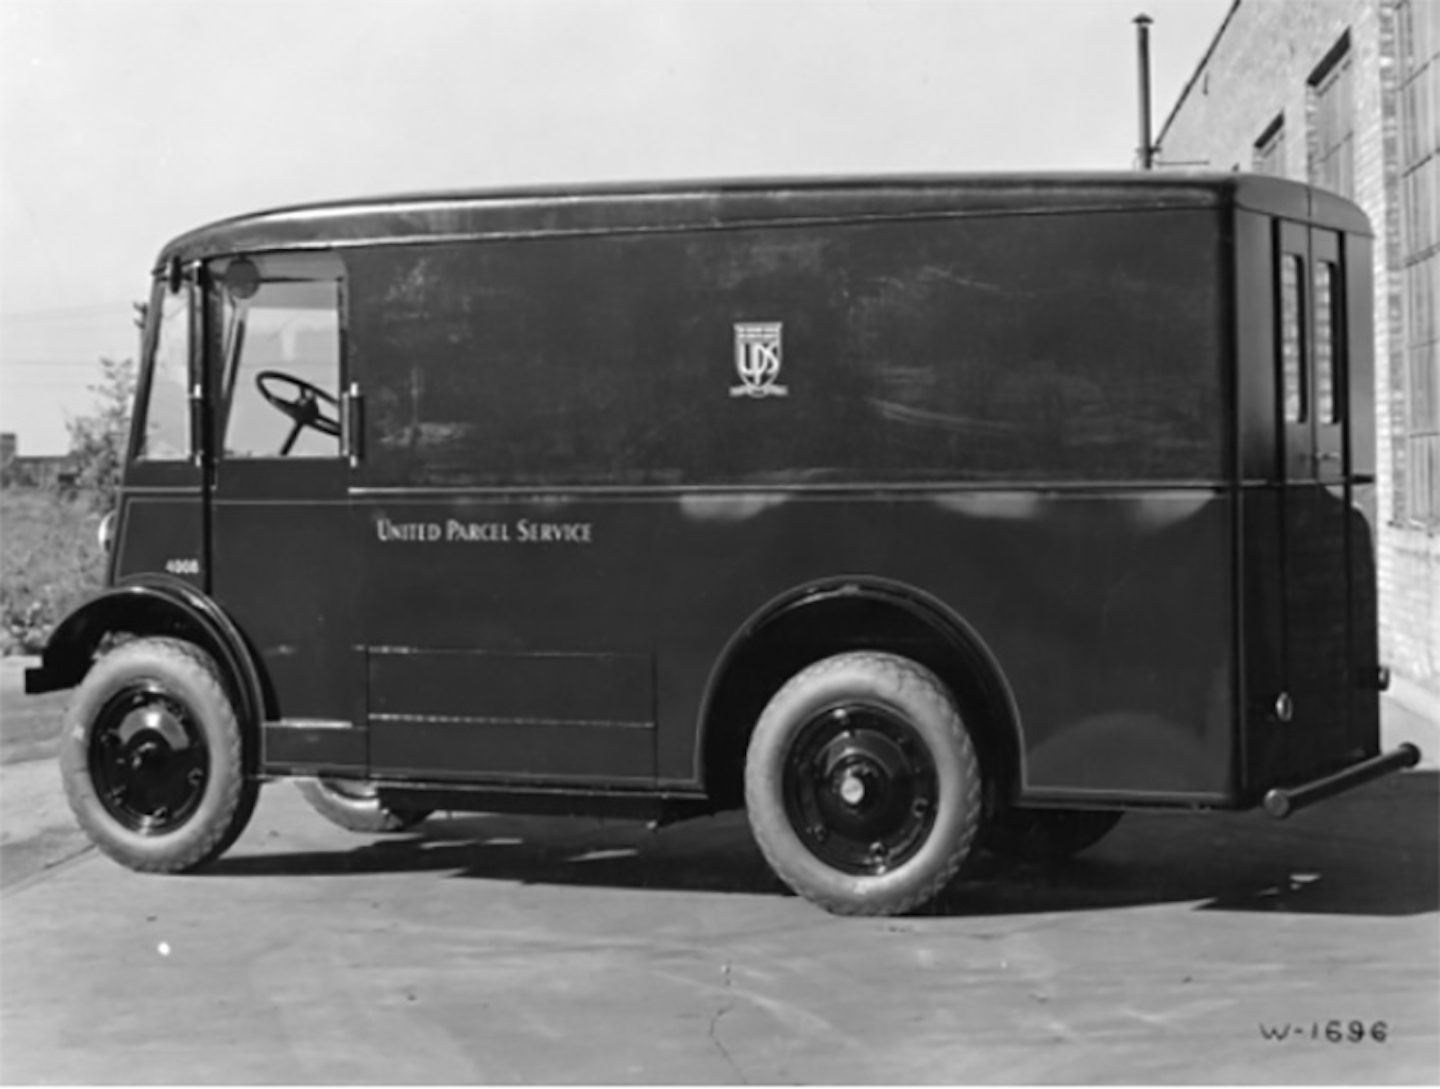 UPS' electric efforts date back to 1930.